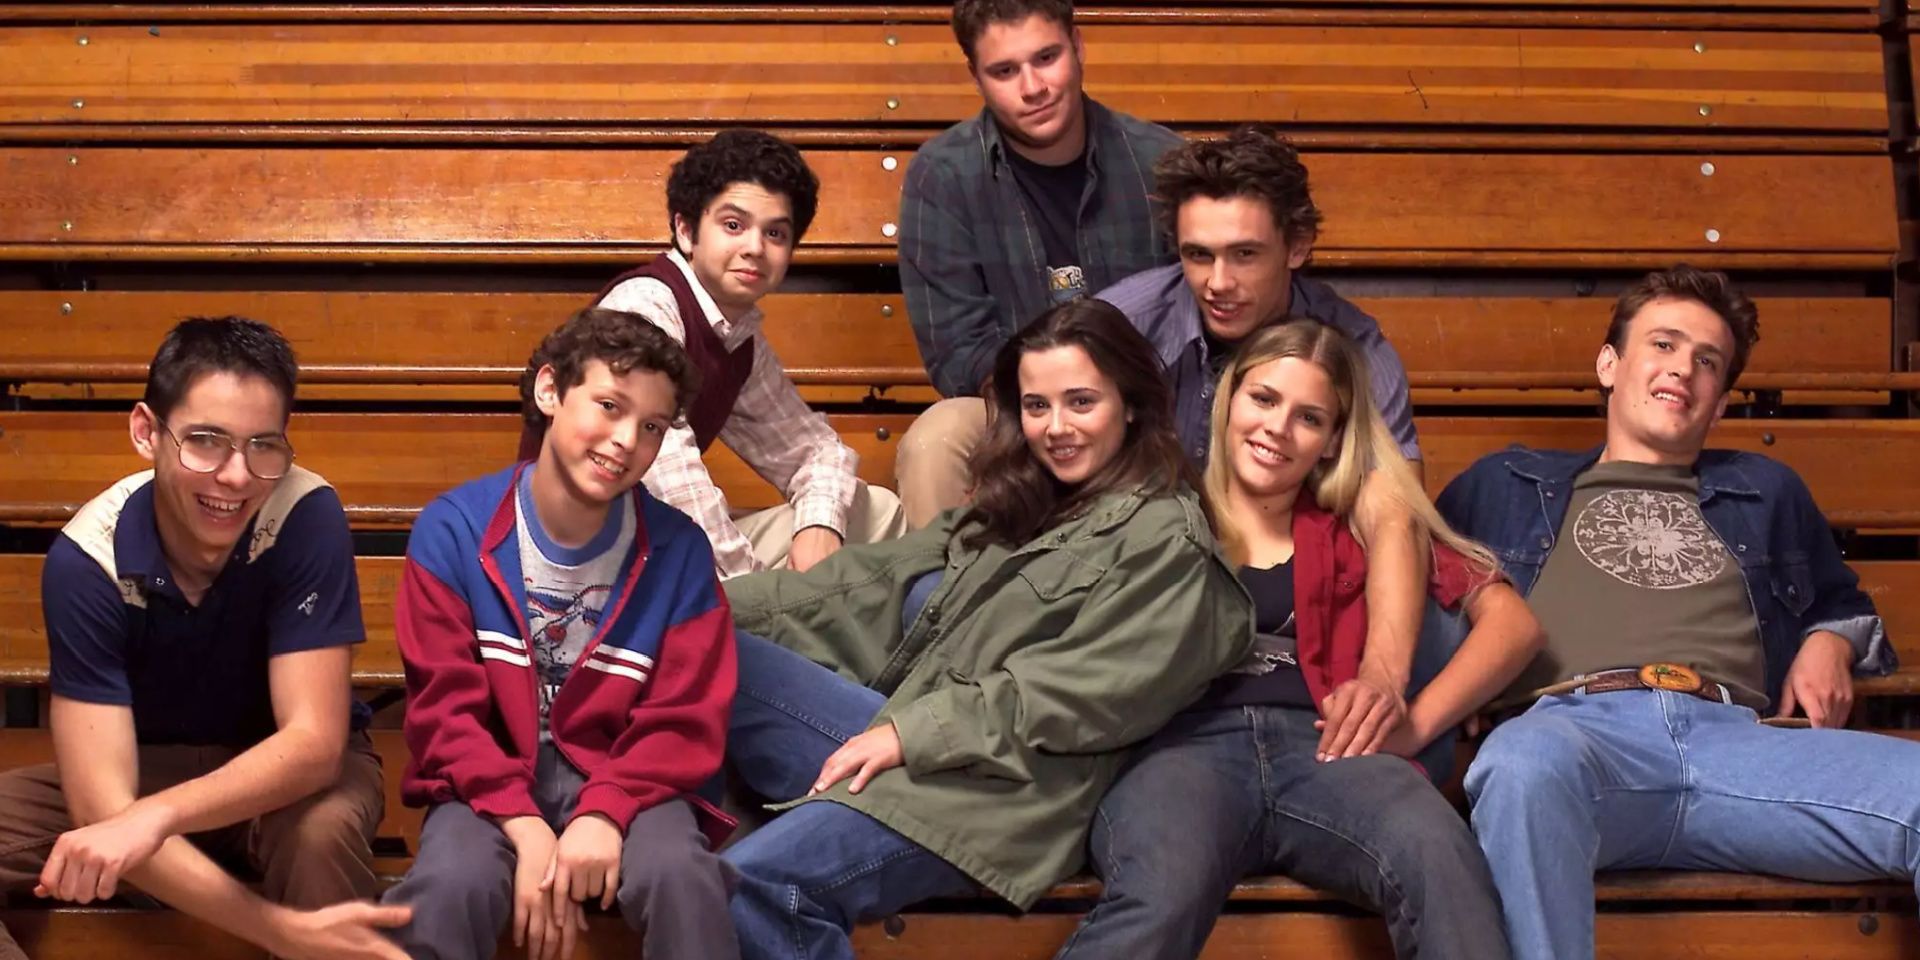 The teens from Freaks and Geeks sit on the gym bleachers.